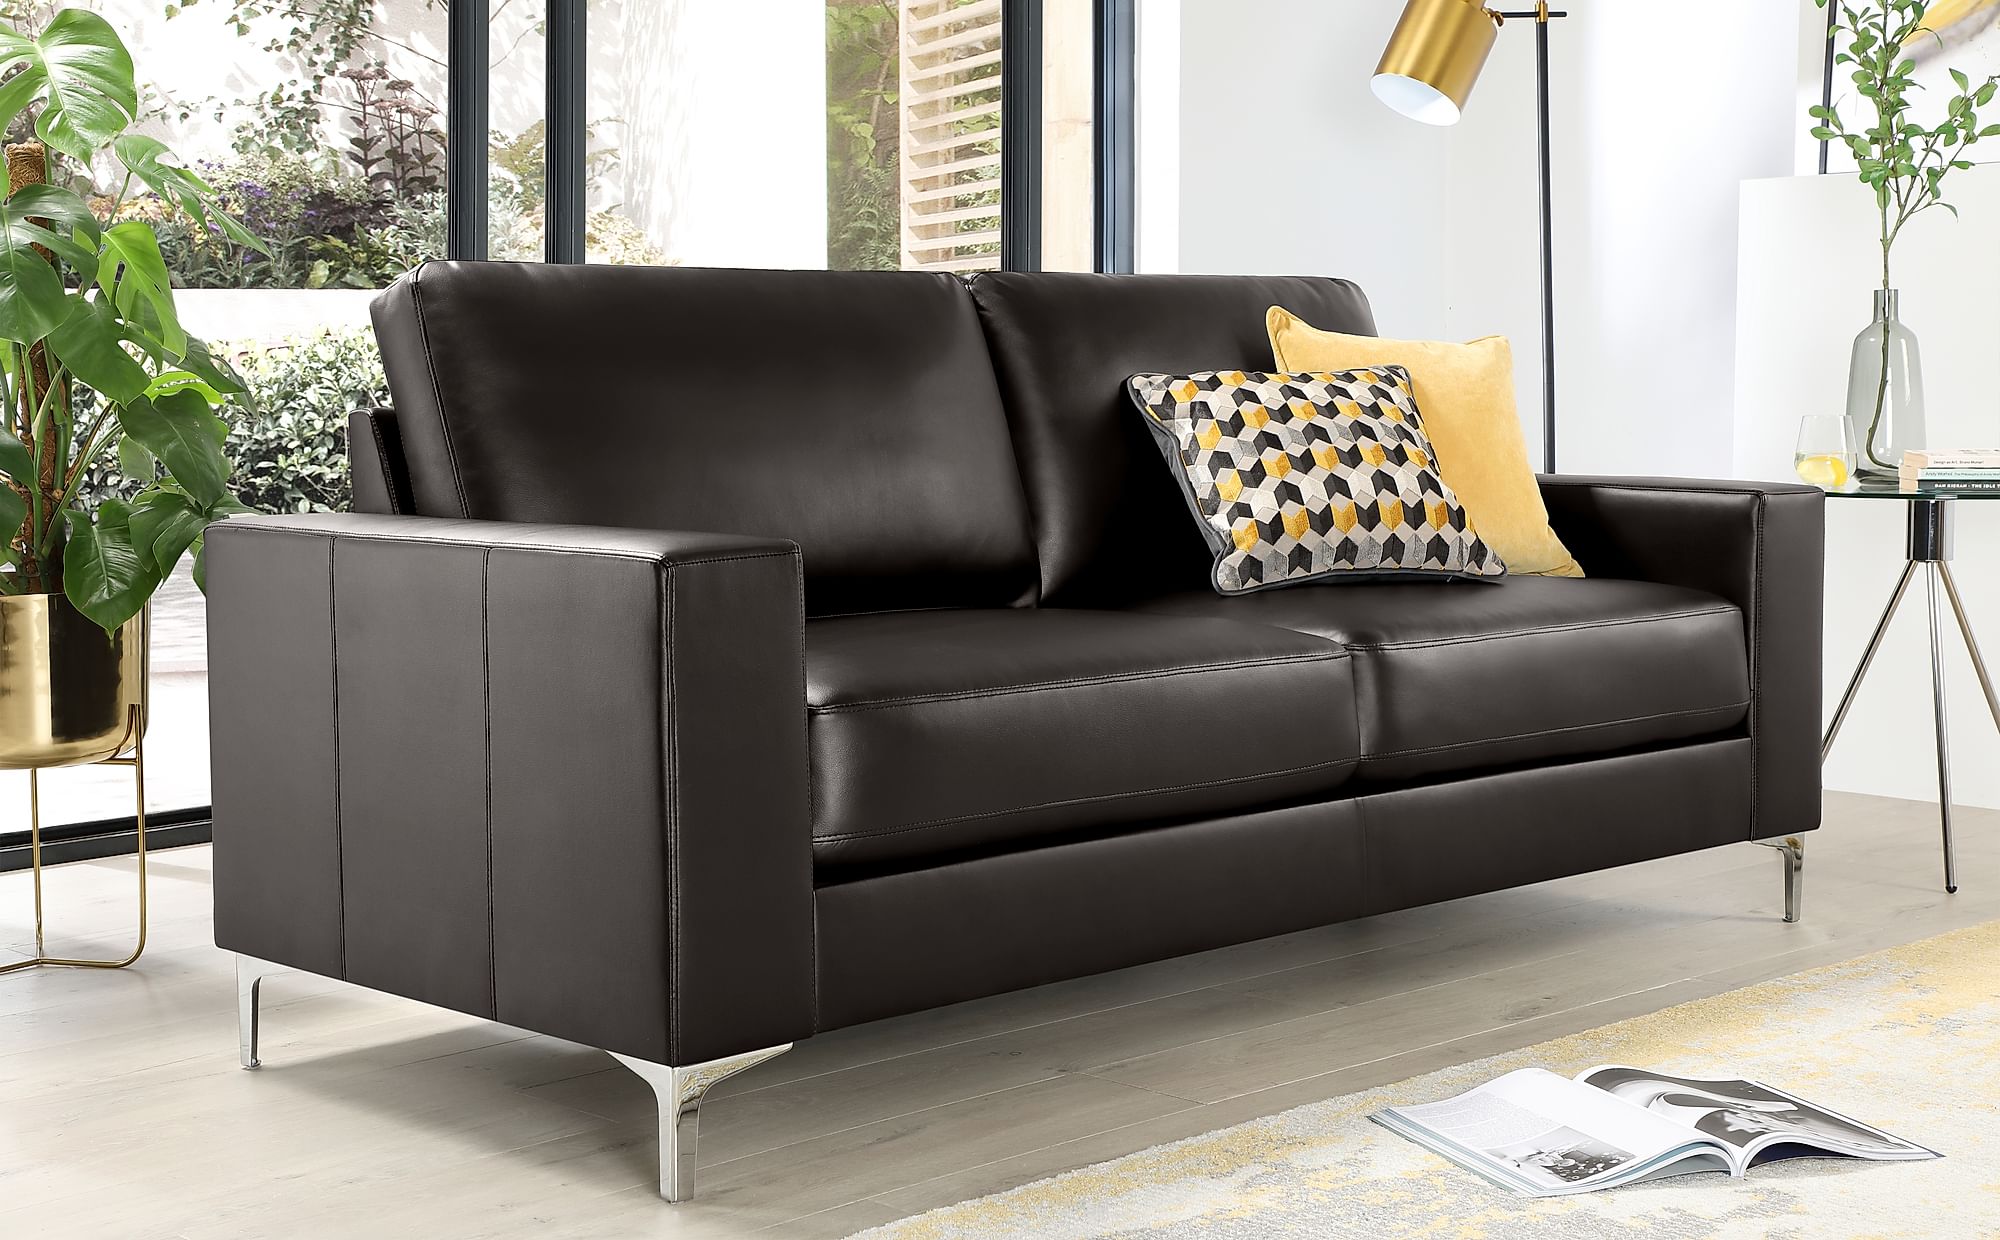 home decor trends brown leather sofa